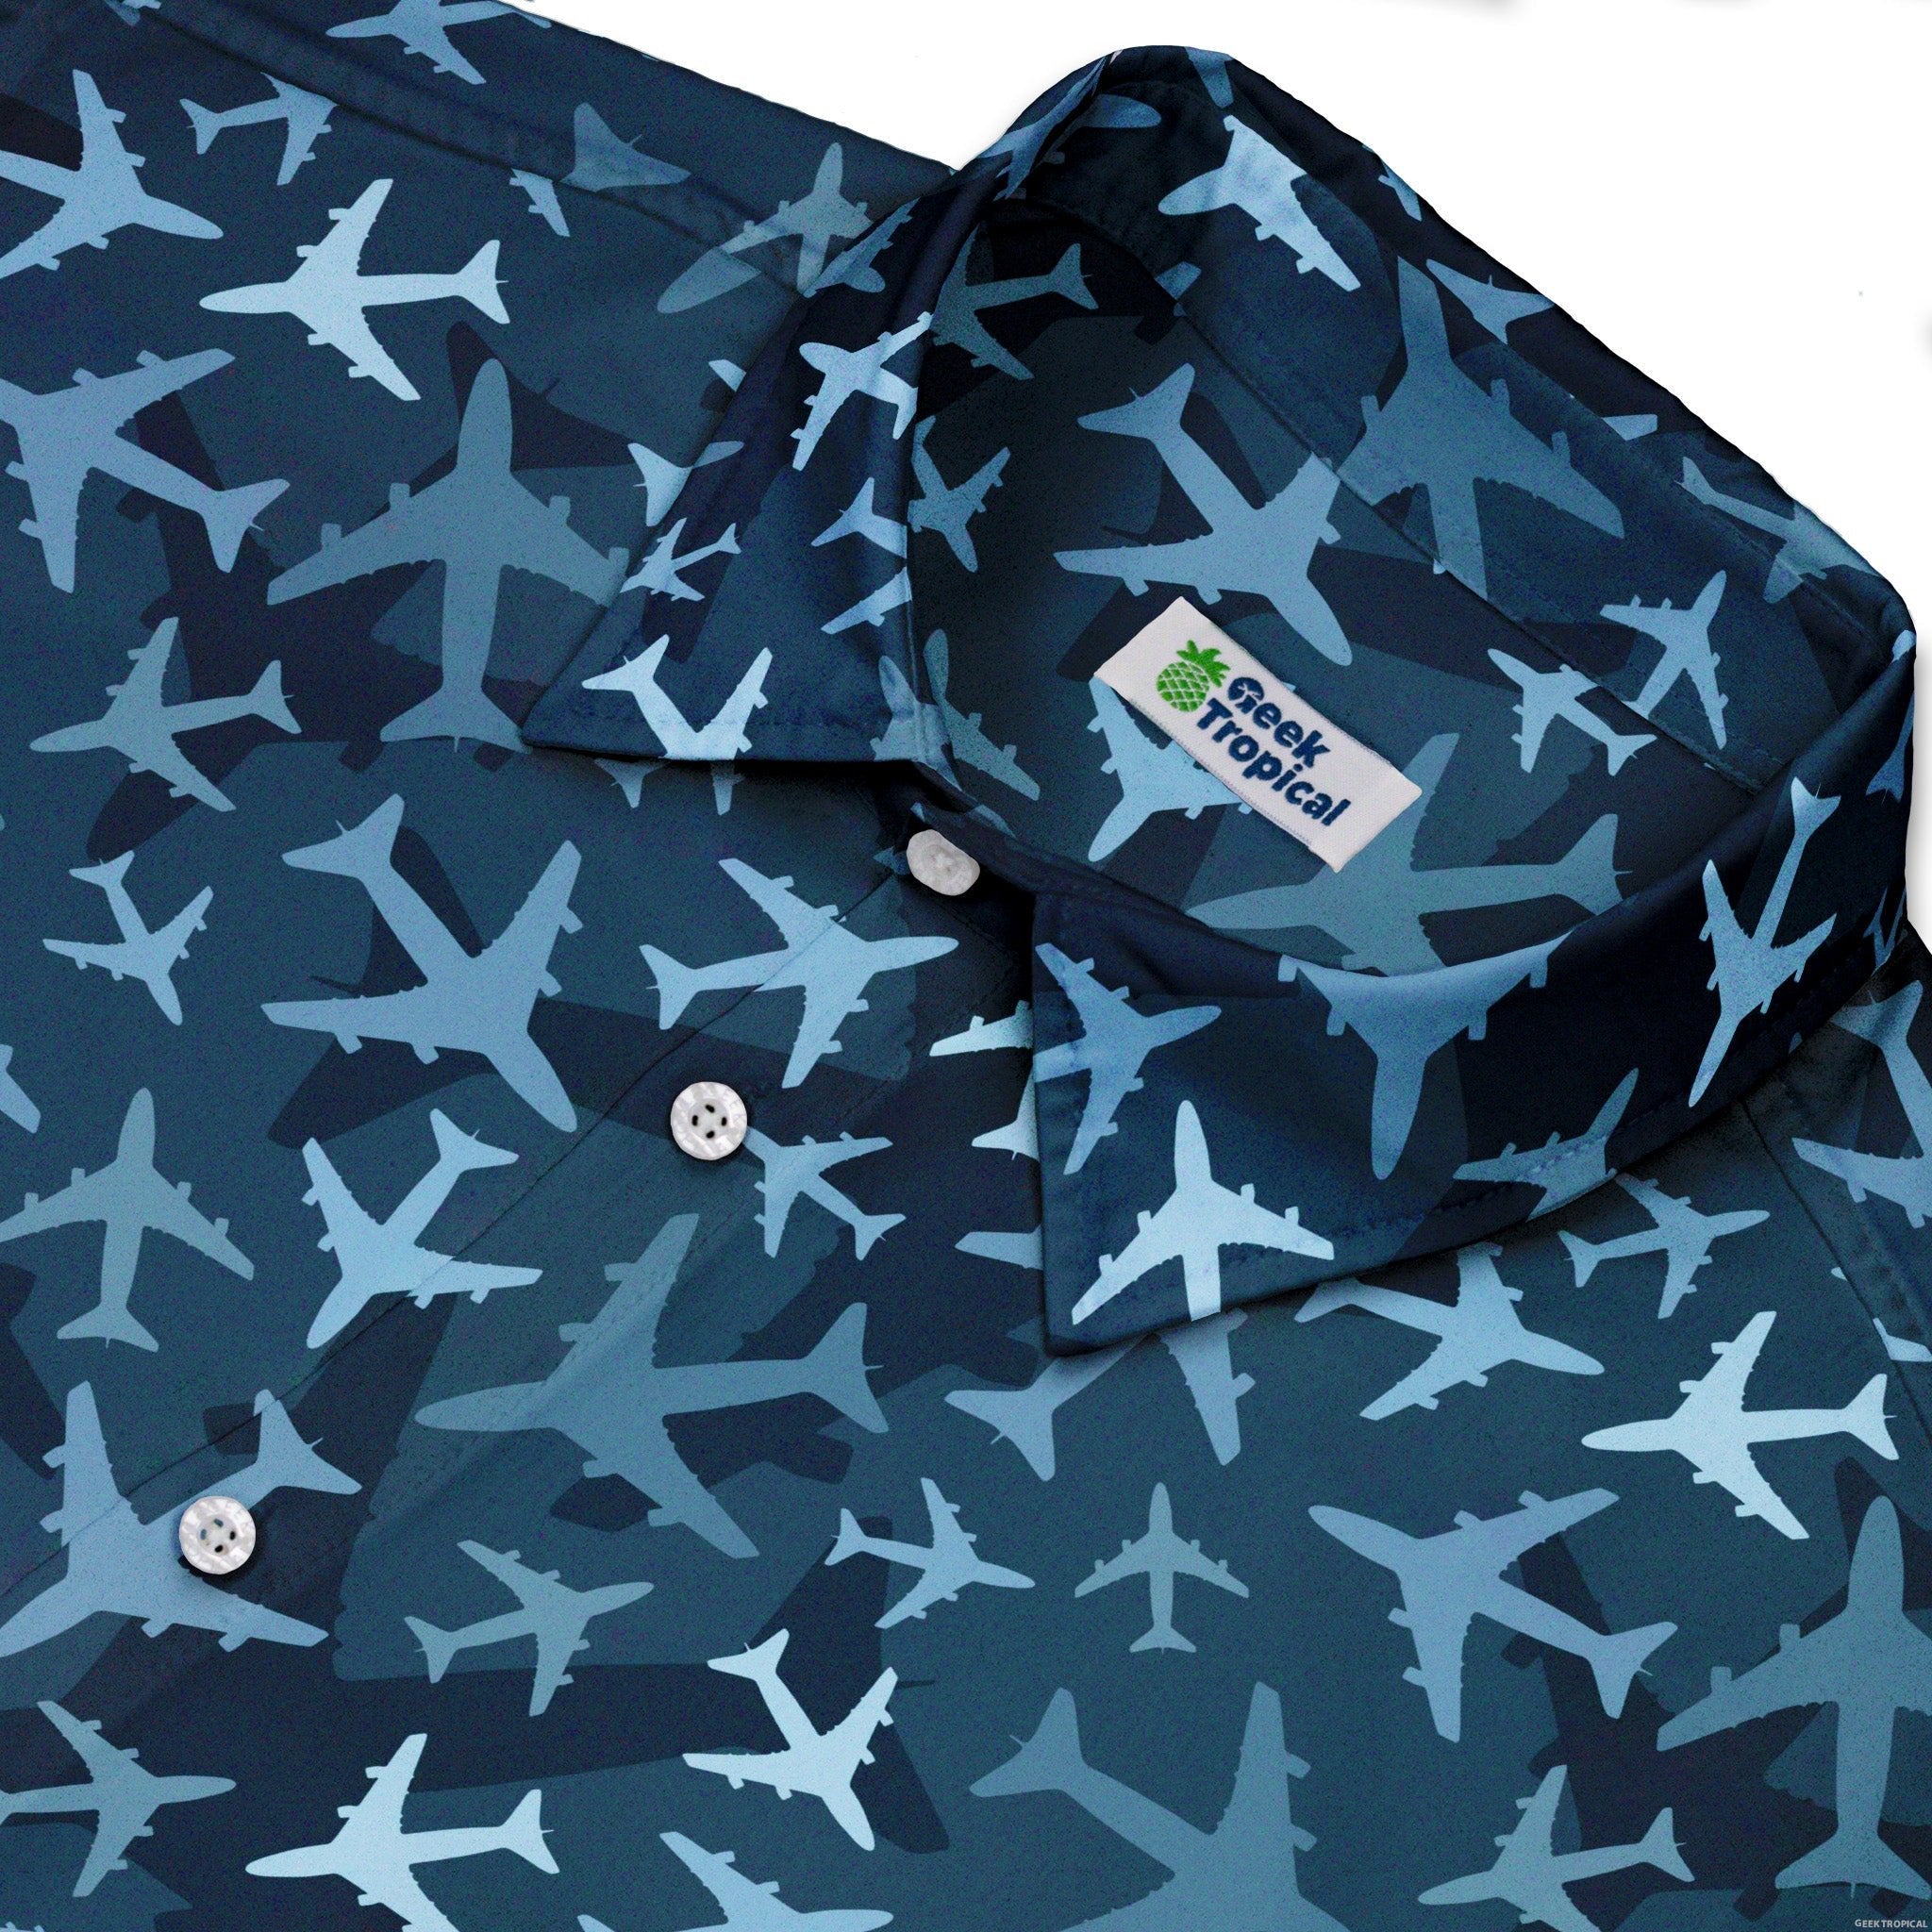 Airplanes Blue Camouflage Blue Button Up Shirt - adult sizing - aviation print -